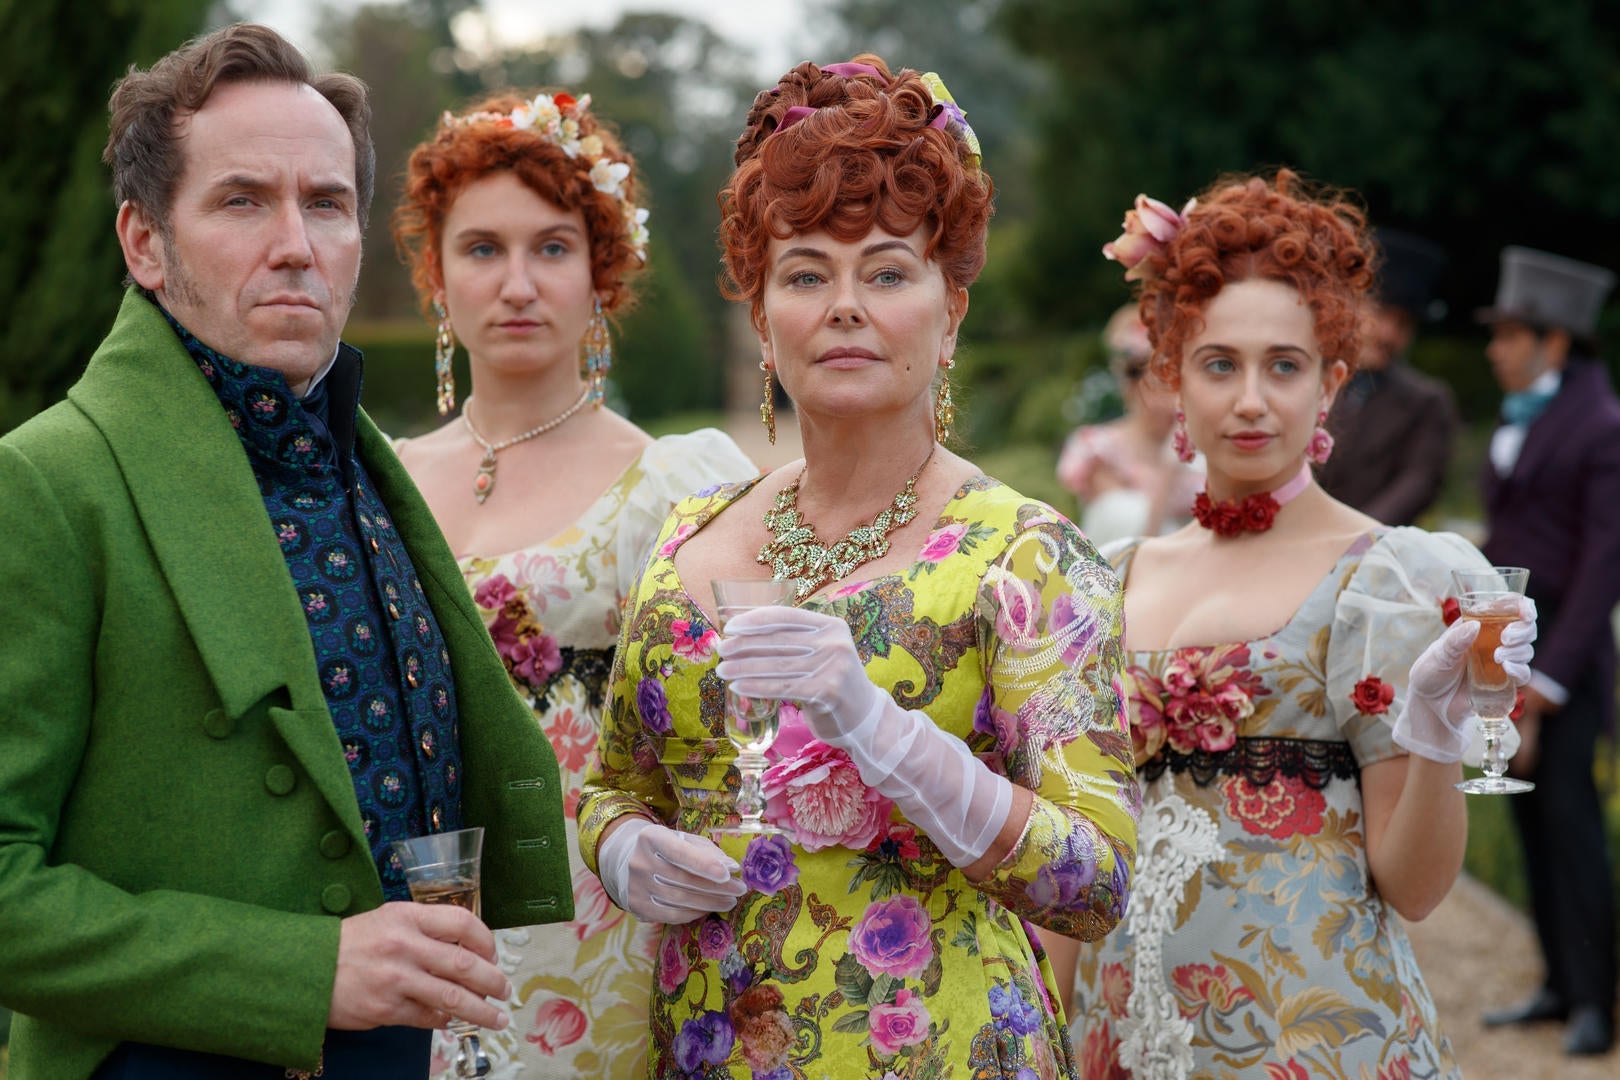 Ben Miller as Lord Featherington, wearing a bright green coat, stands with Polly Walker, who wears a yellow dress with a busy pattern of pink and purple flowers. Behind them, Harriet Cains as Philippa wears a low-cut floral dress with ruffled sleeves.